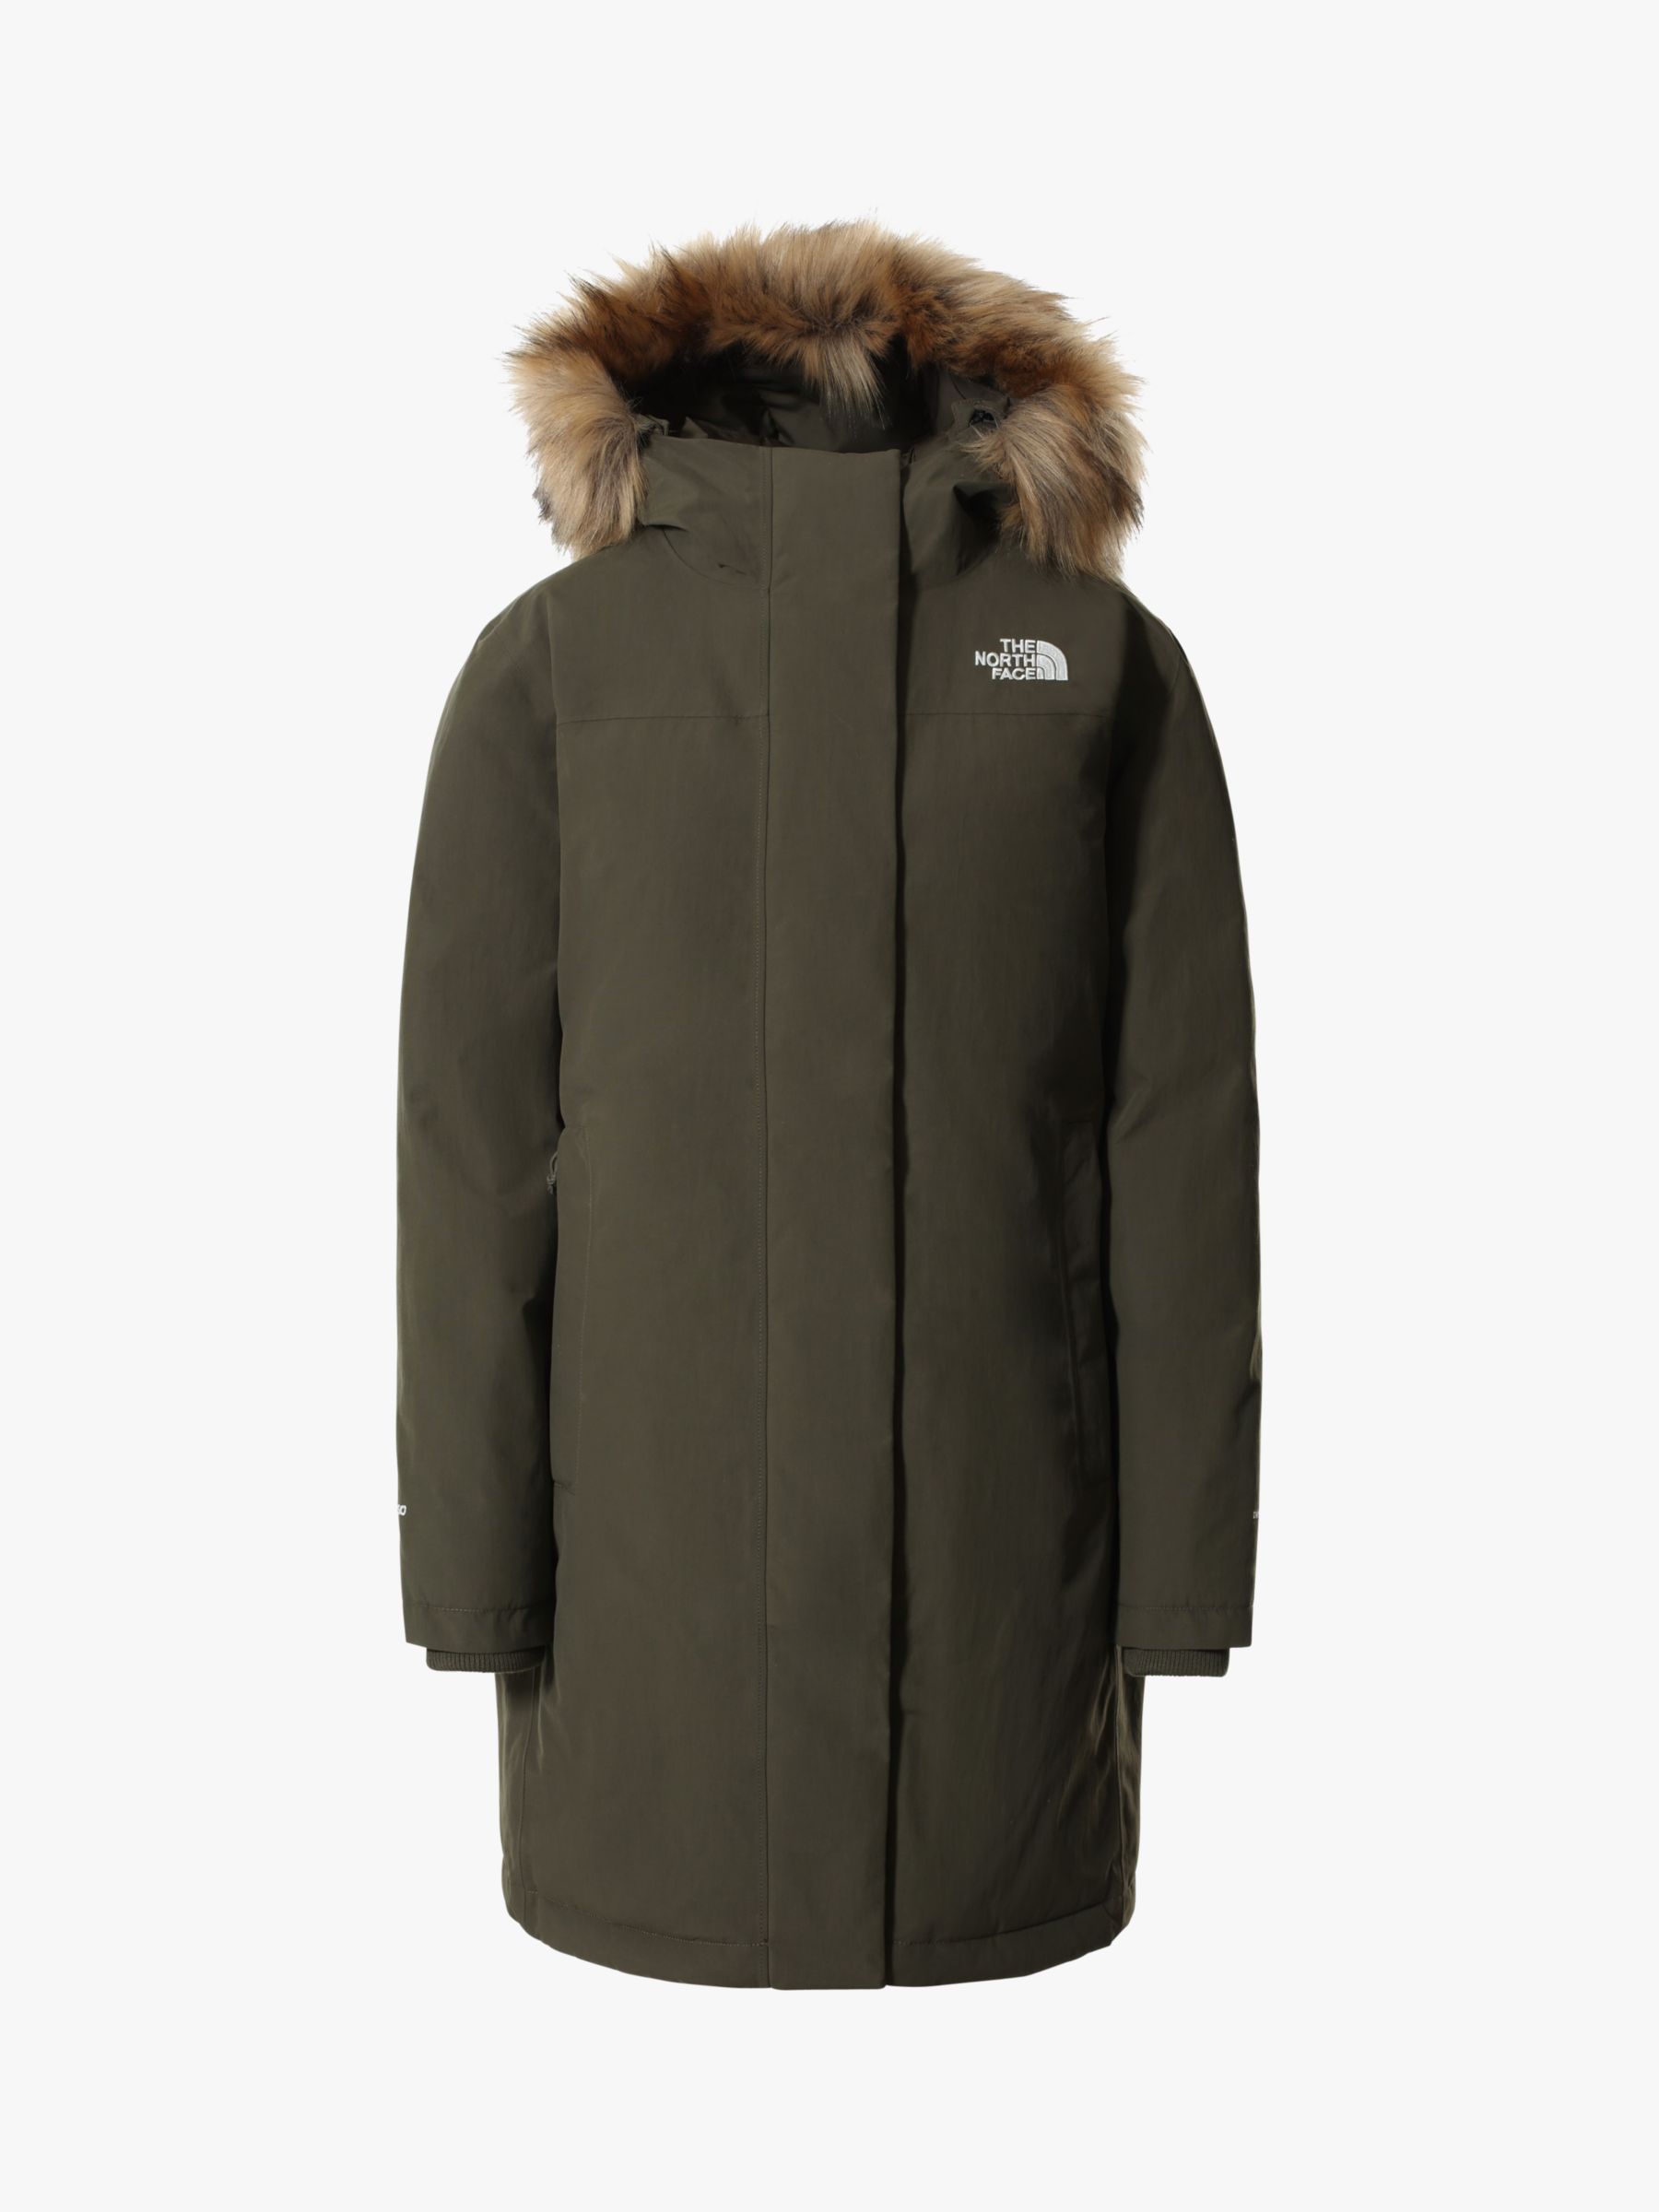 The North Face Arctic Women's Waterproof Parka Jacket